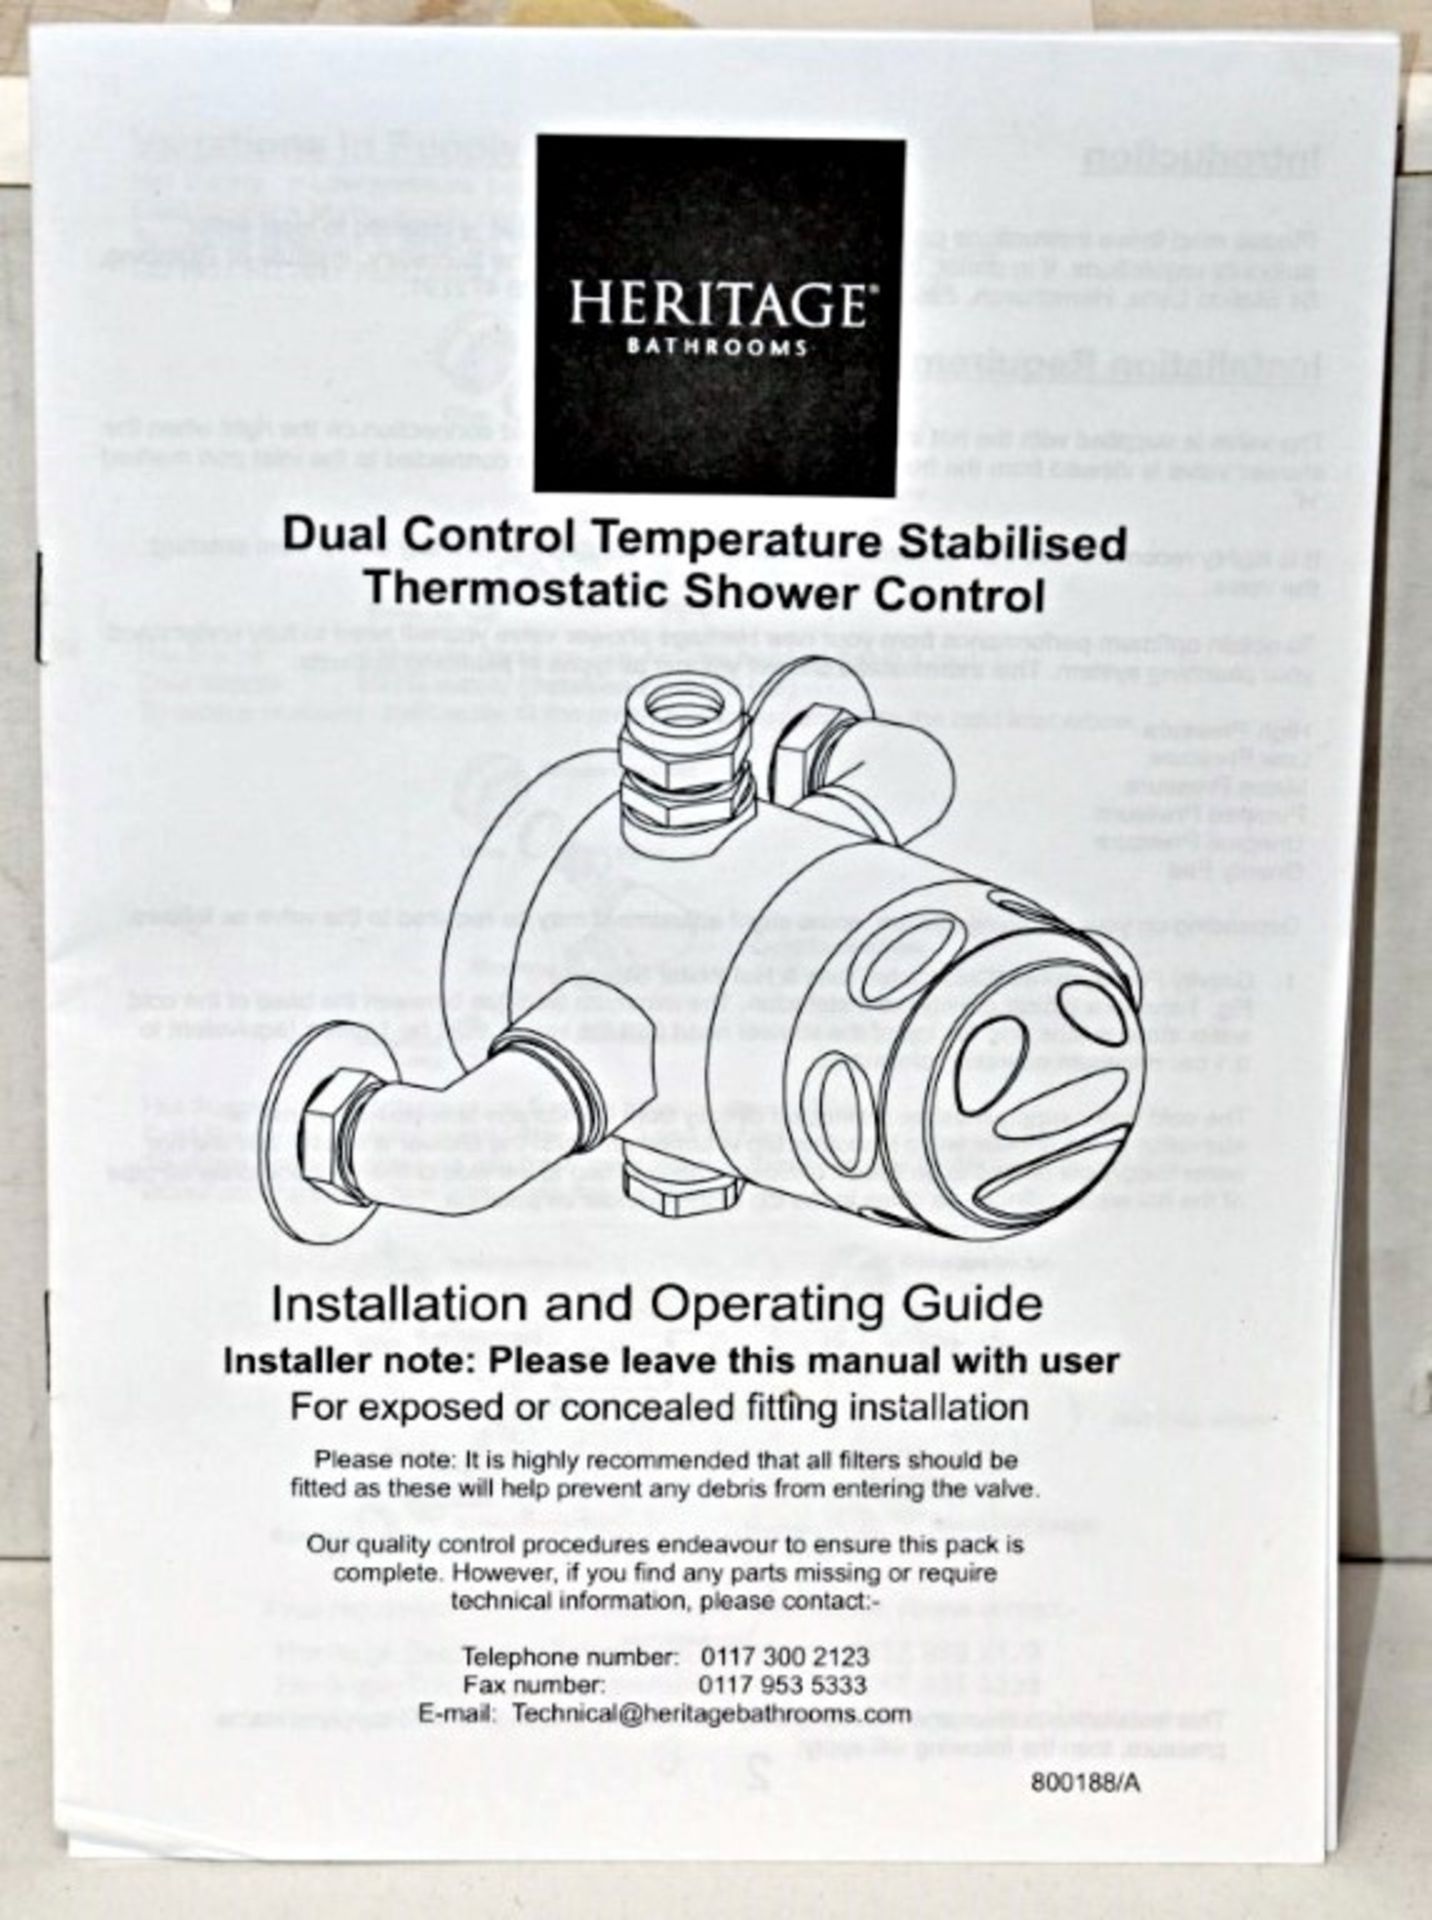 1 x Heritage "Helena" Concealed Valve In Chrome - Duel Control Temperature Stabilised Thermostatic - Image 2 of 4